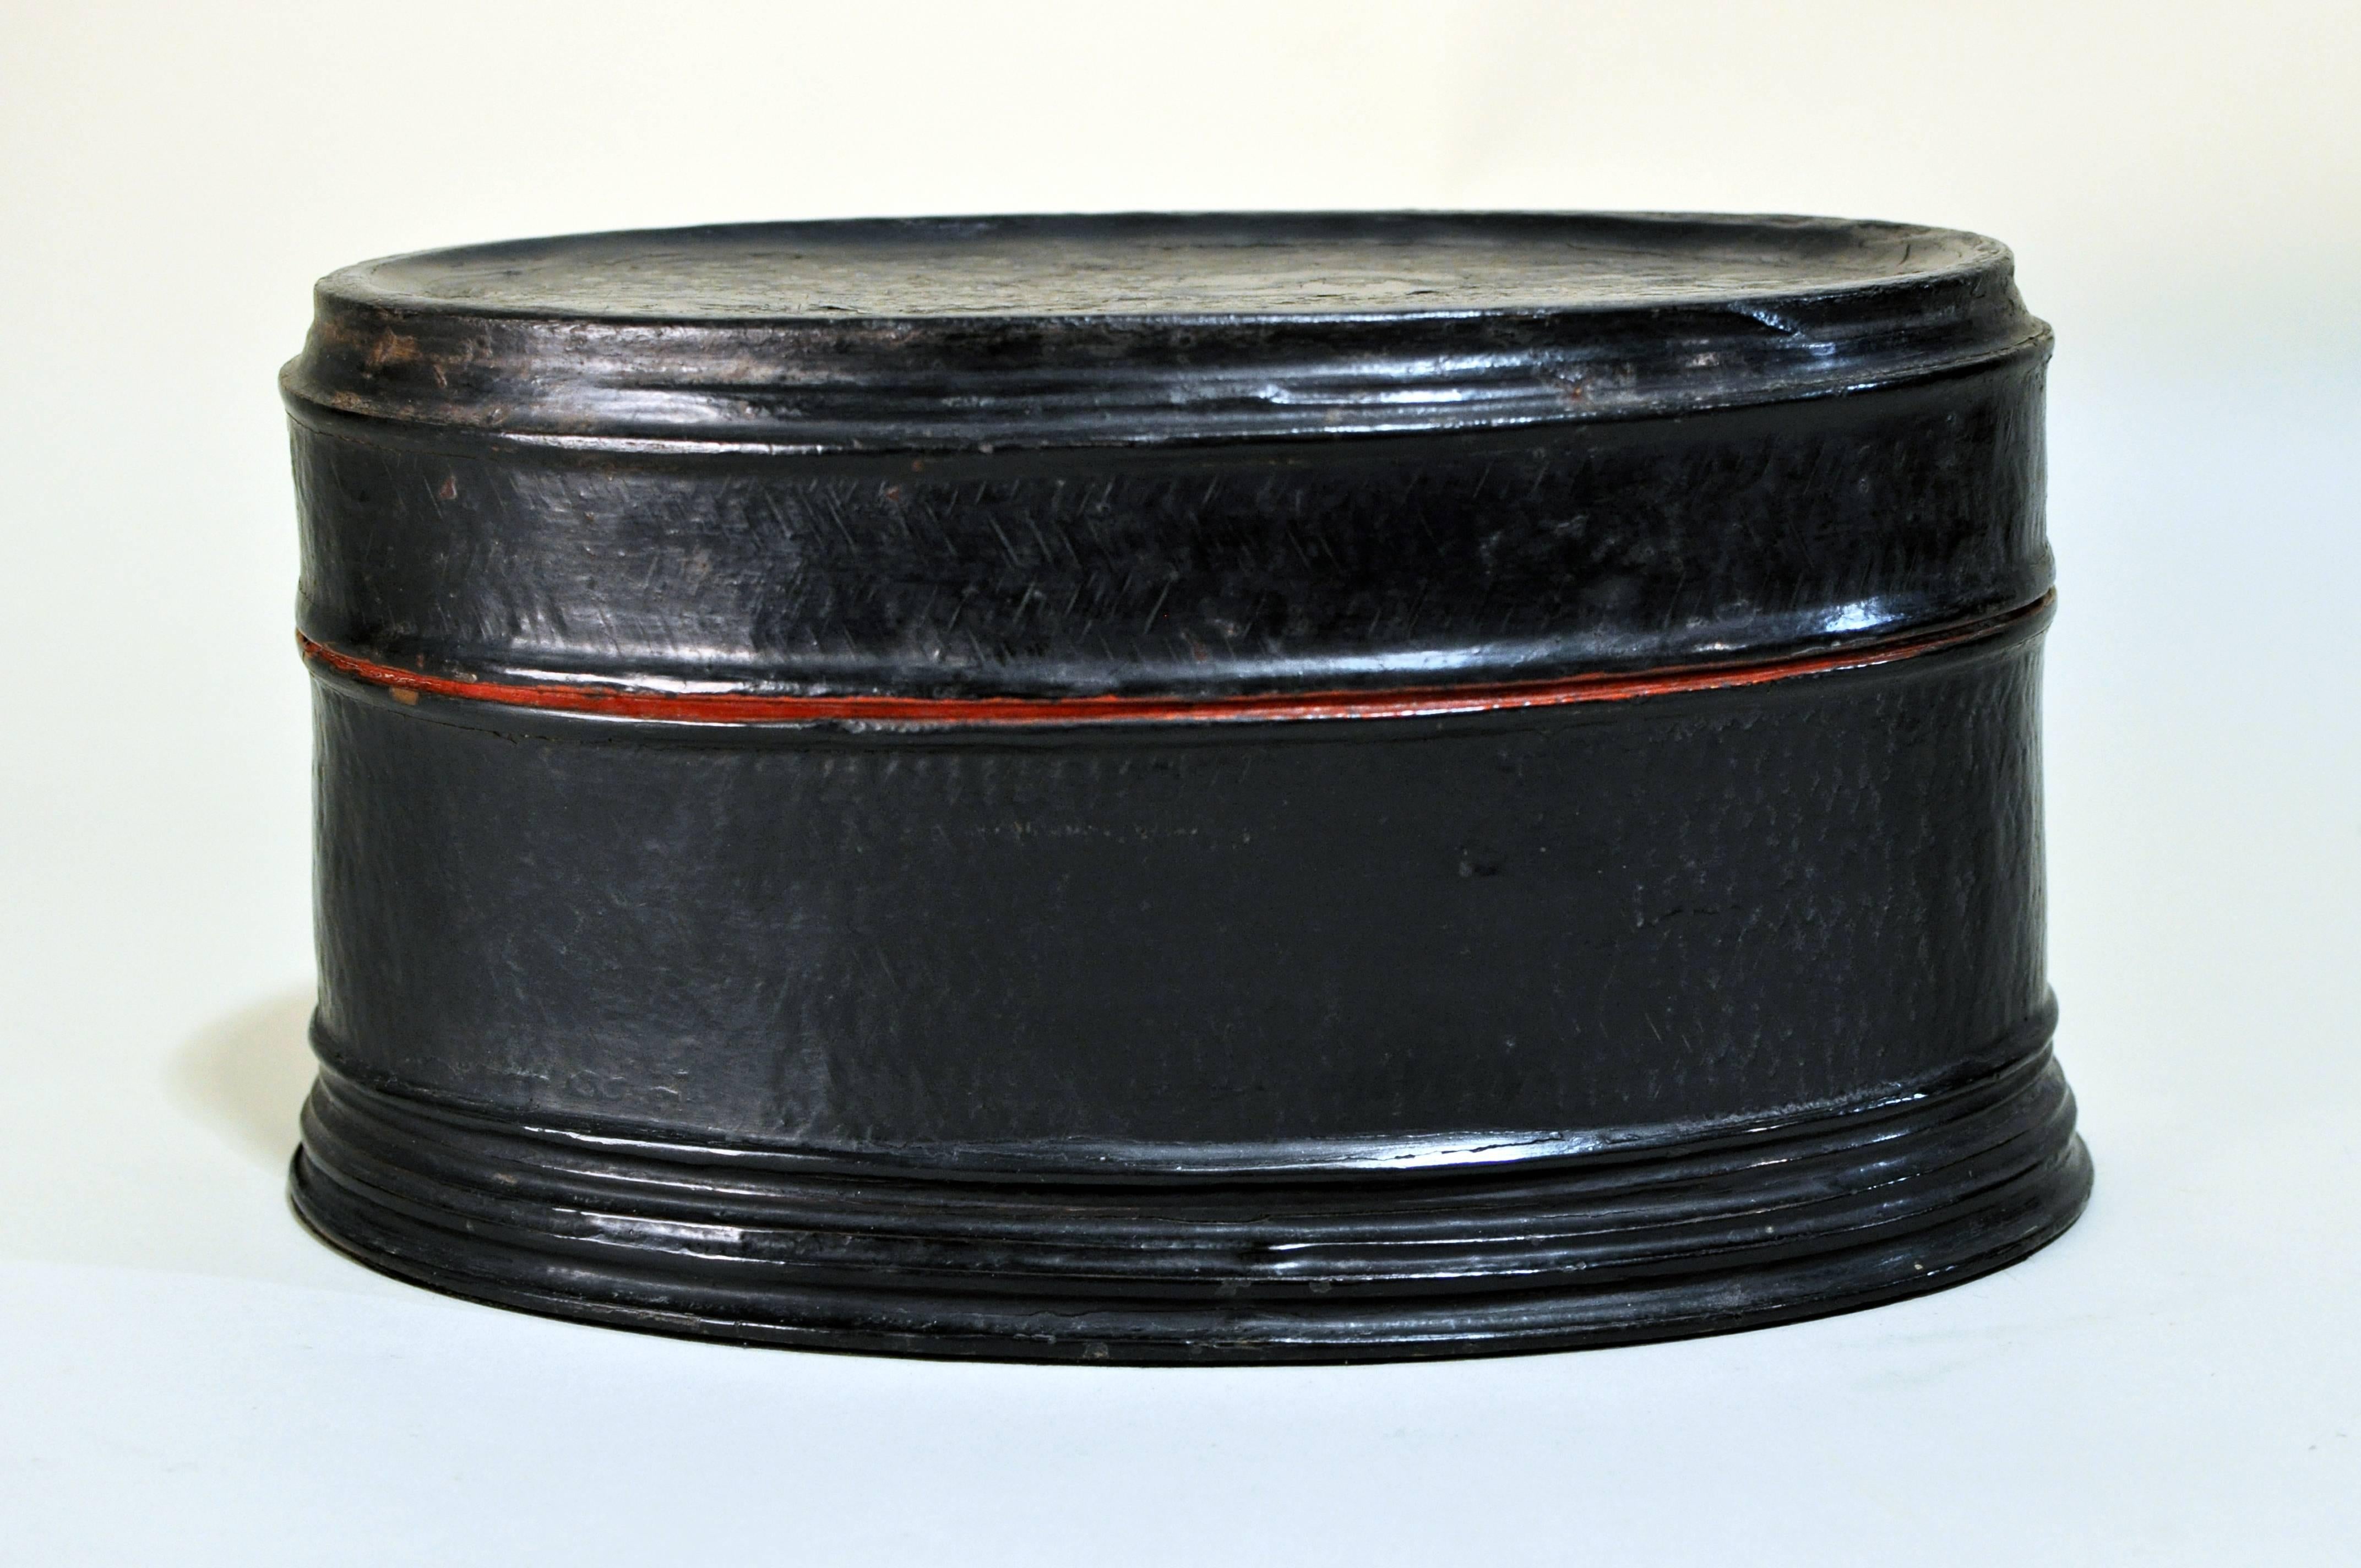 This oval lacquer ware box is from Chiang Mai, Thailand and is made from bamboo and lacquer.